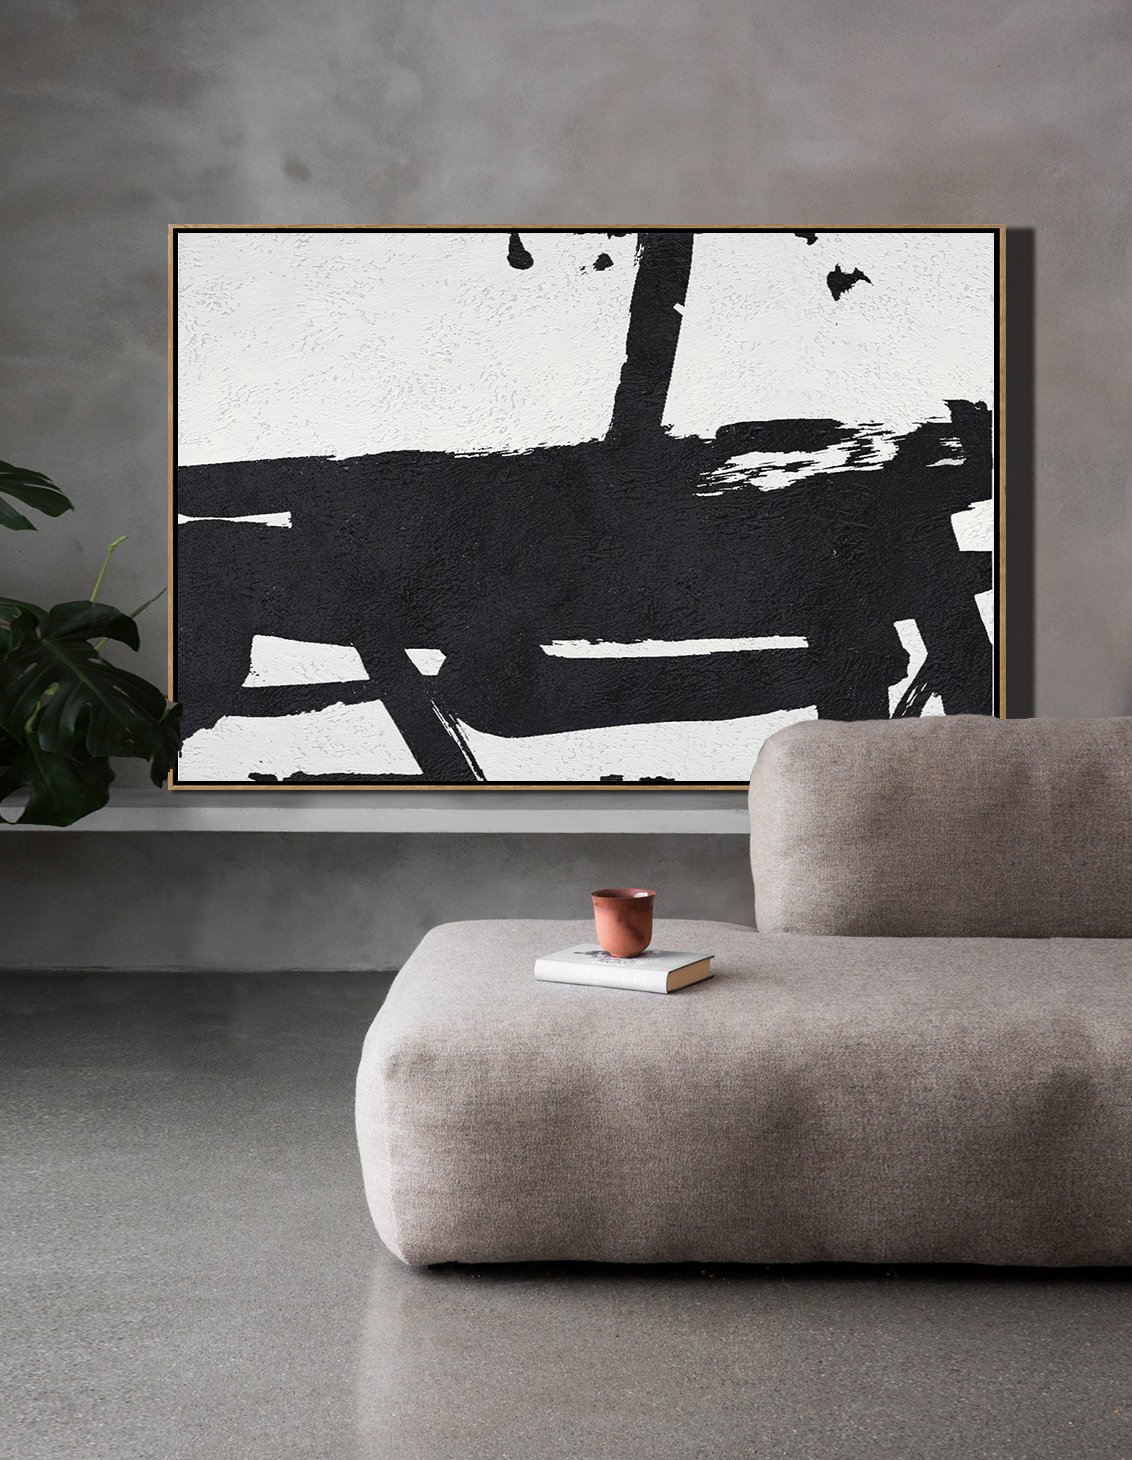 Abstract Painting On Canvas,Hand Painted Oversized Horizontal Minimal Art On Canvas, Black And White Minimalist Painting - Abstract Painting Modern Art